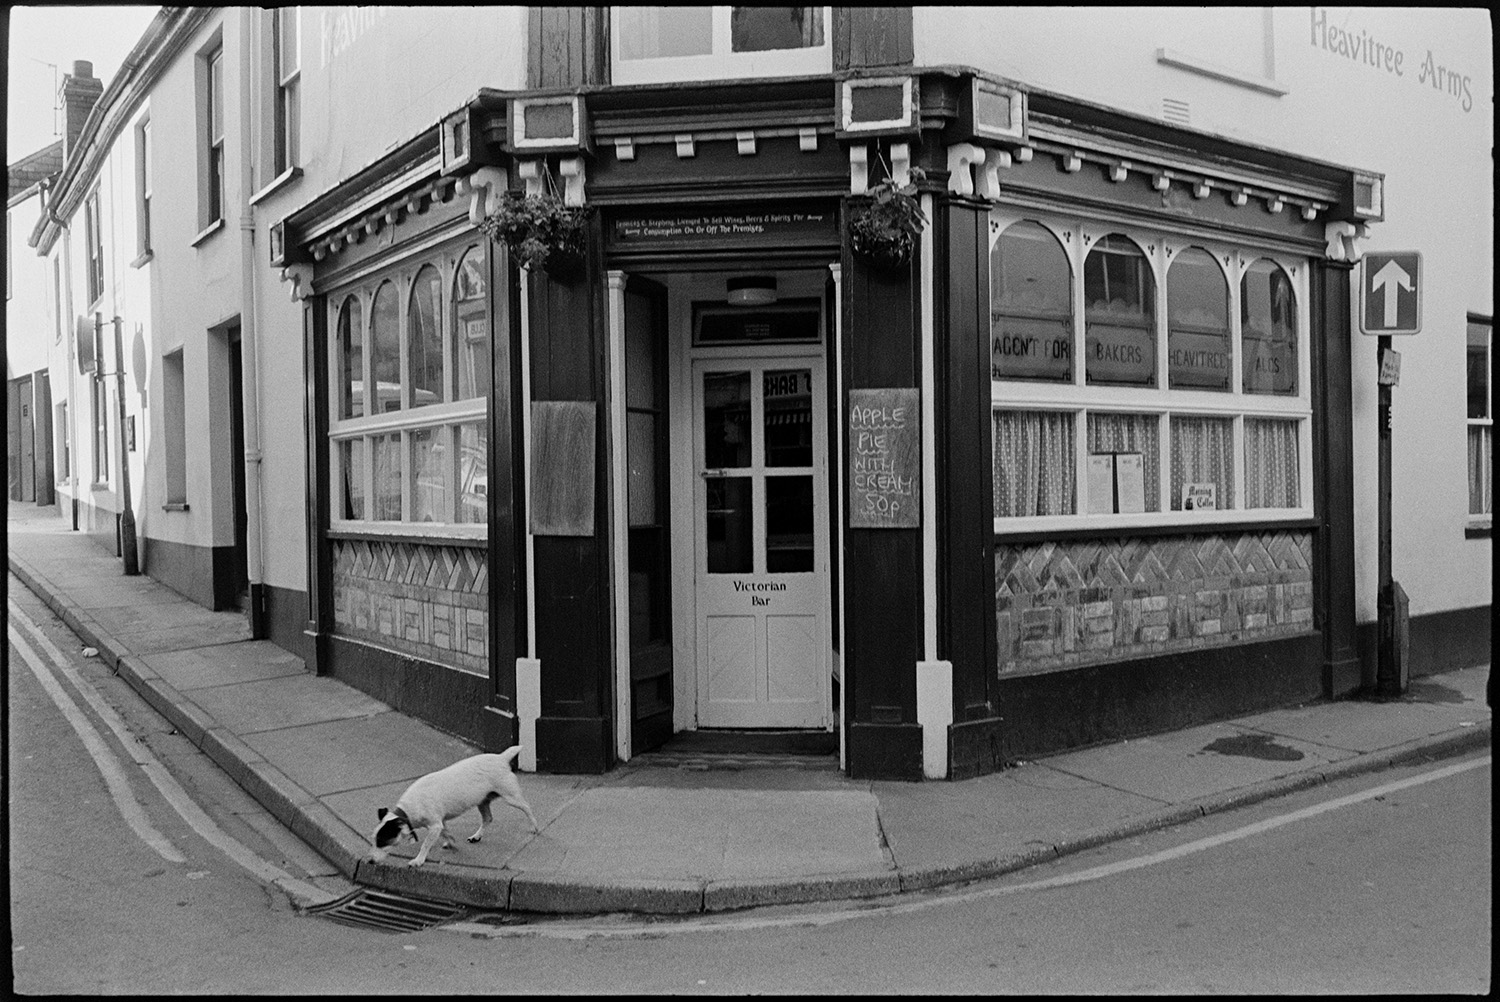 Street scenes with shop fronts, window display of clothes shop. 
[A dog on the street outside the entrance to the Heavitree Arms pub in Mill Street, Bideford. A chalk board is advertising apple pie outside. The windows are arched and the brickwork below is patterned.]